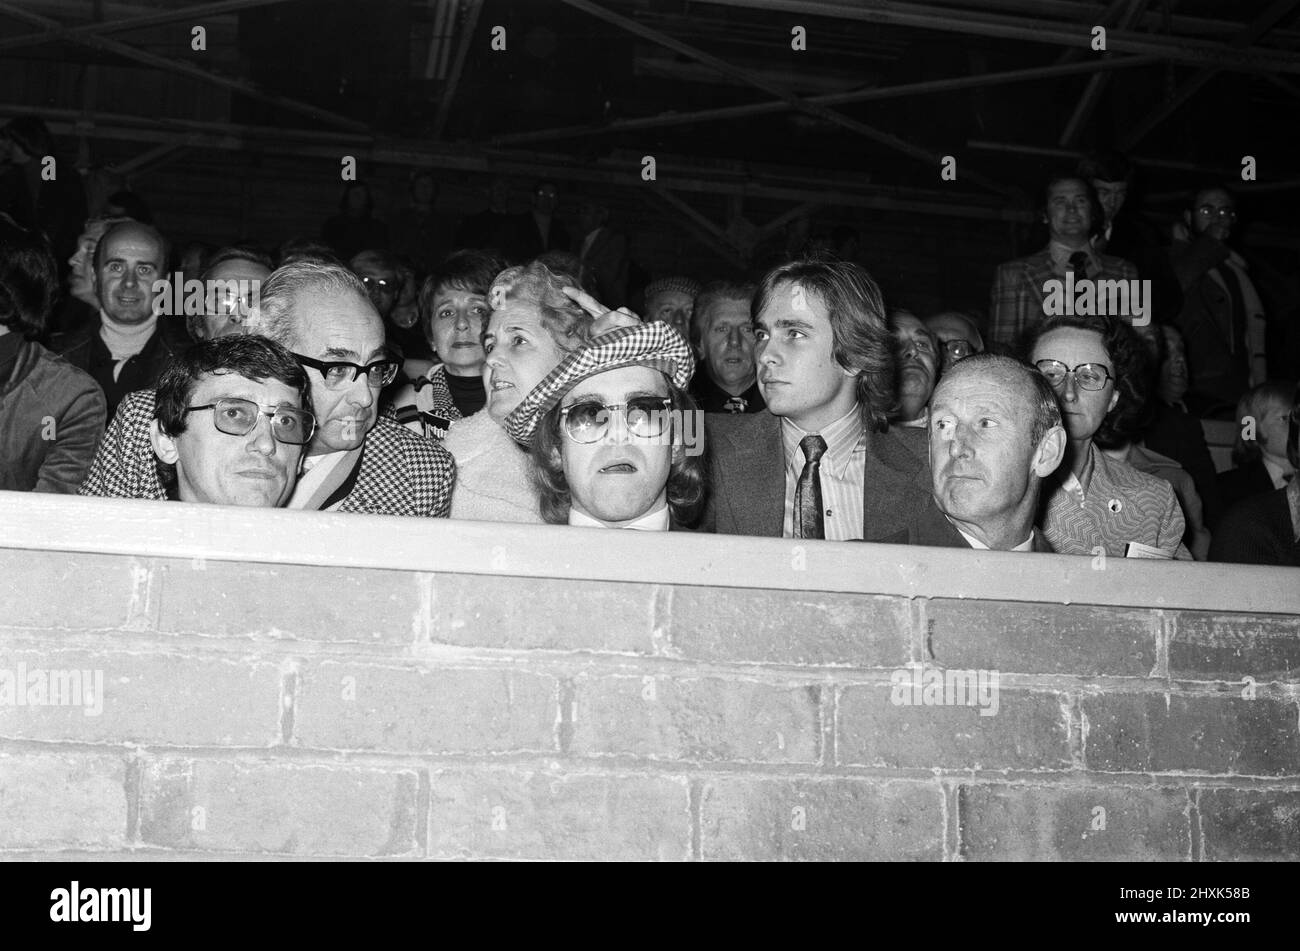 Elton John watching the football match, West Bromwich Albion v Watford. Final score 1-0 to West Bromwich Albion. League Cup 3rd round. 25th October 1977. Stock Photo